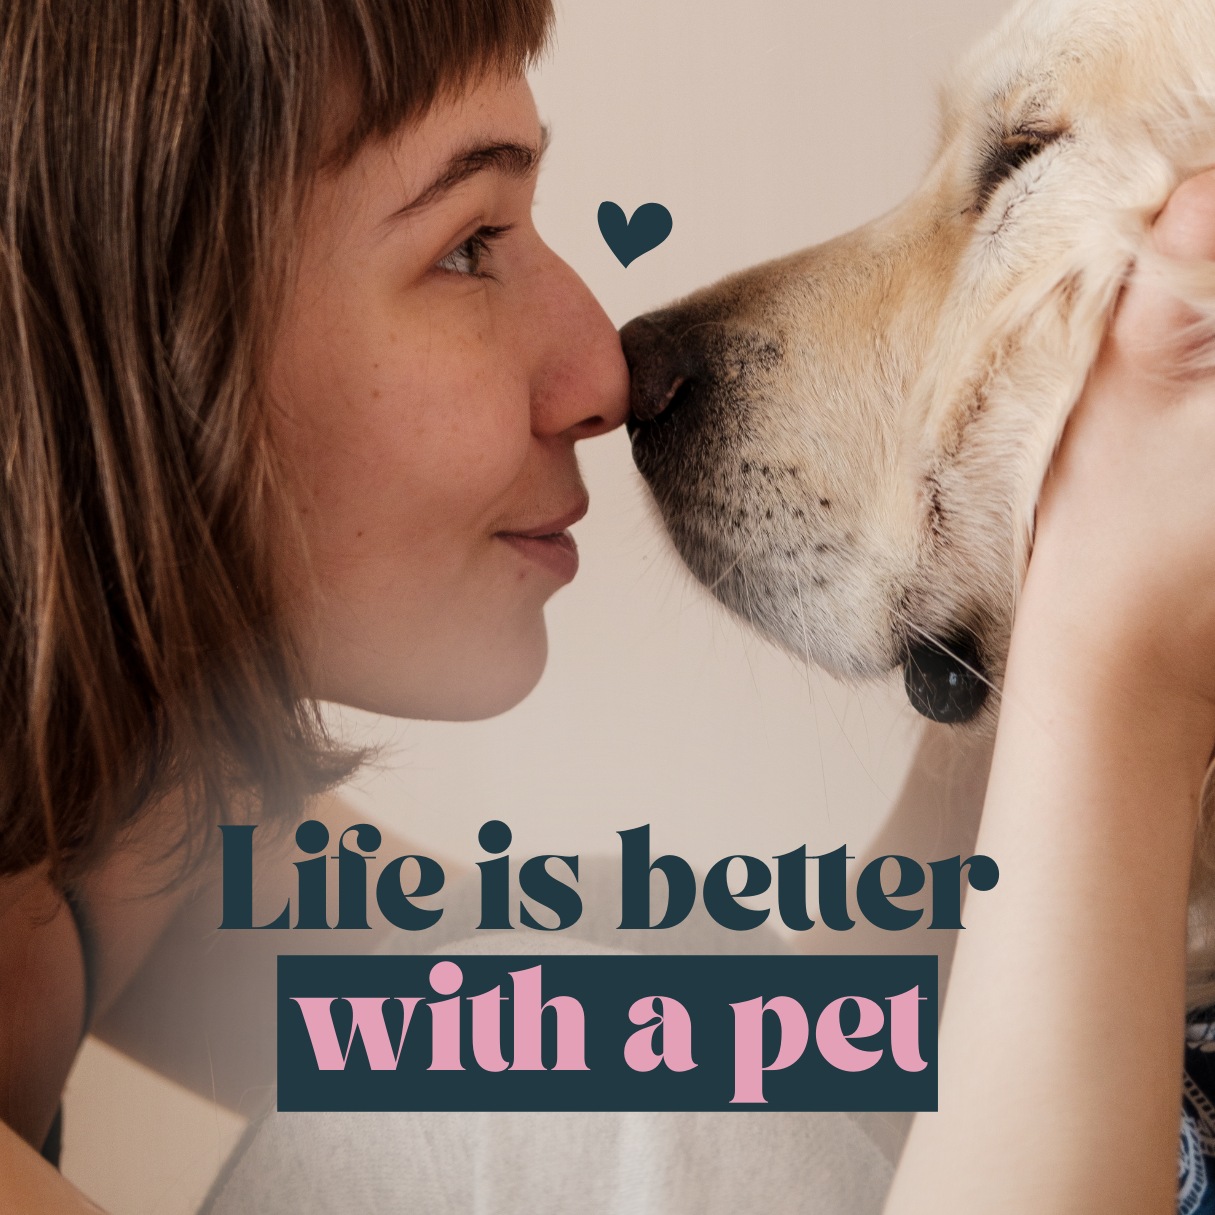 Life is Better with a Pet preview image.